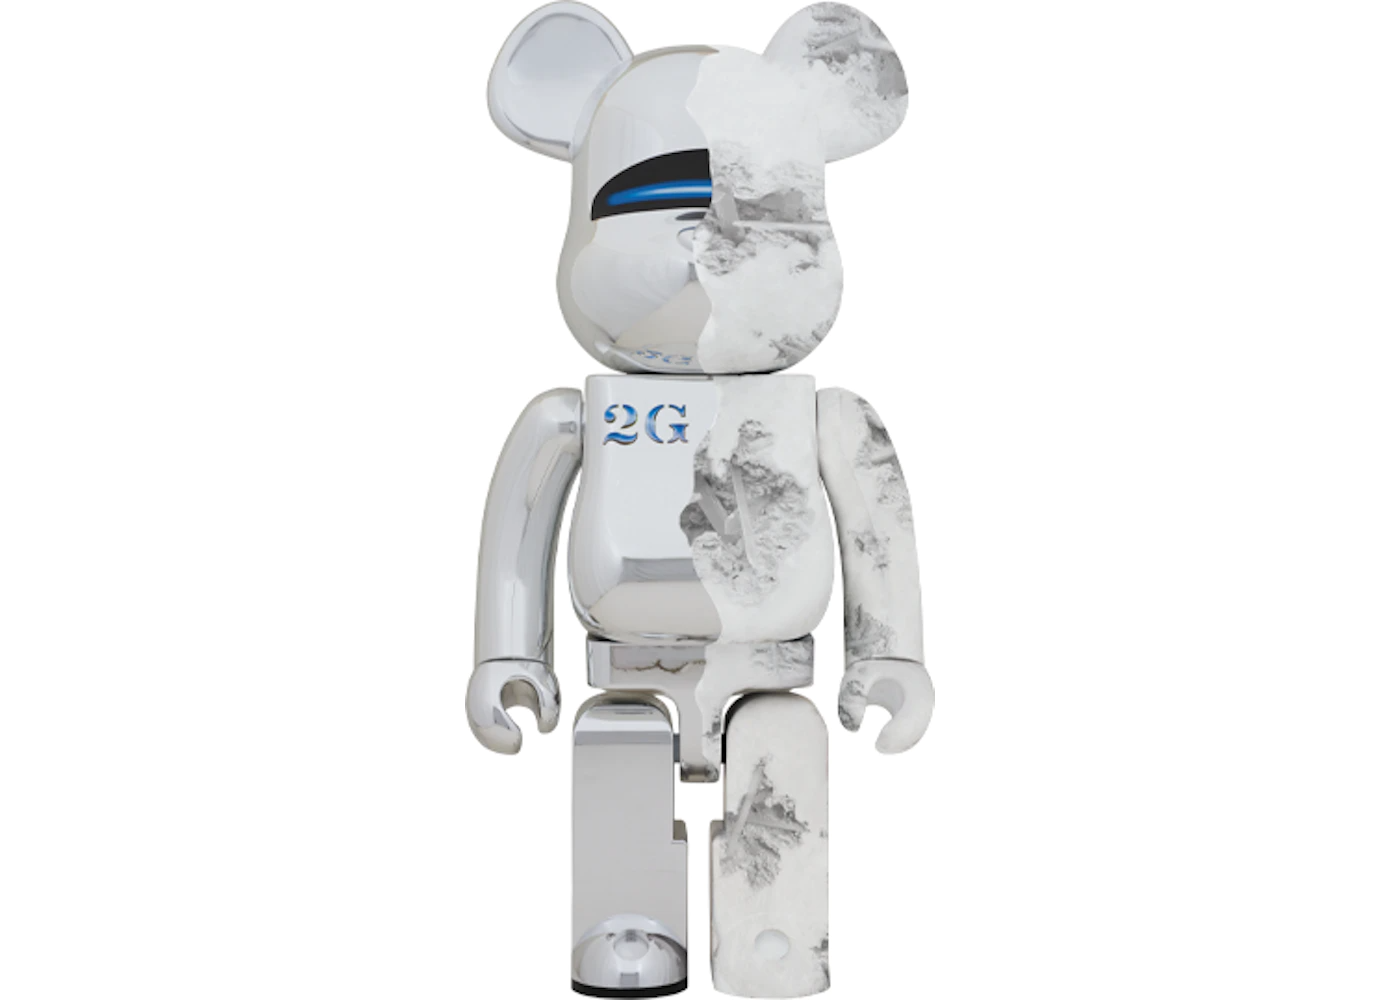 Most Expensive Bearbrick Figures Currently Available